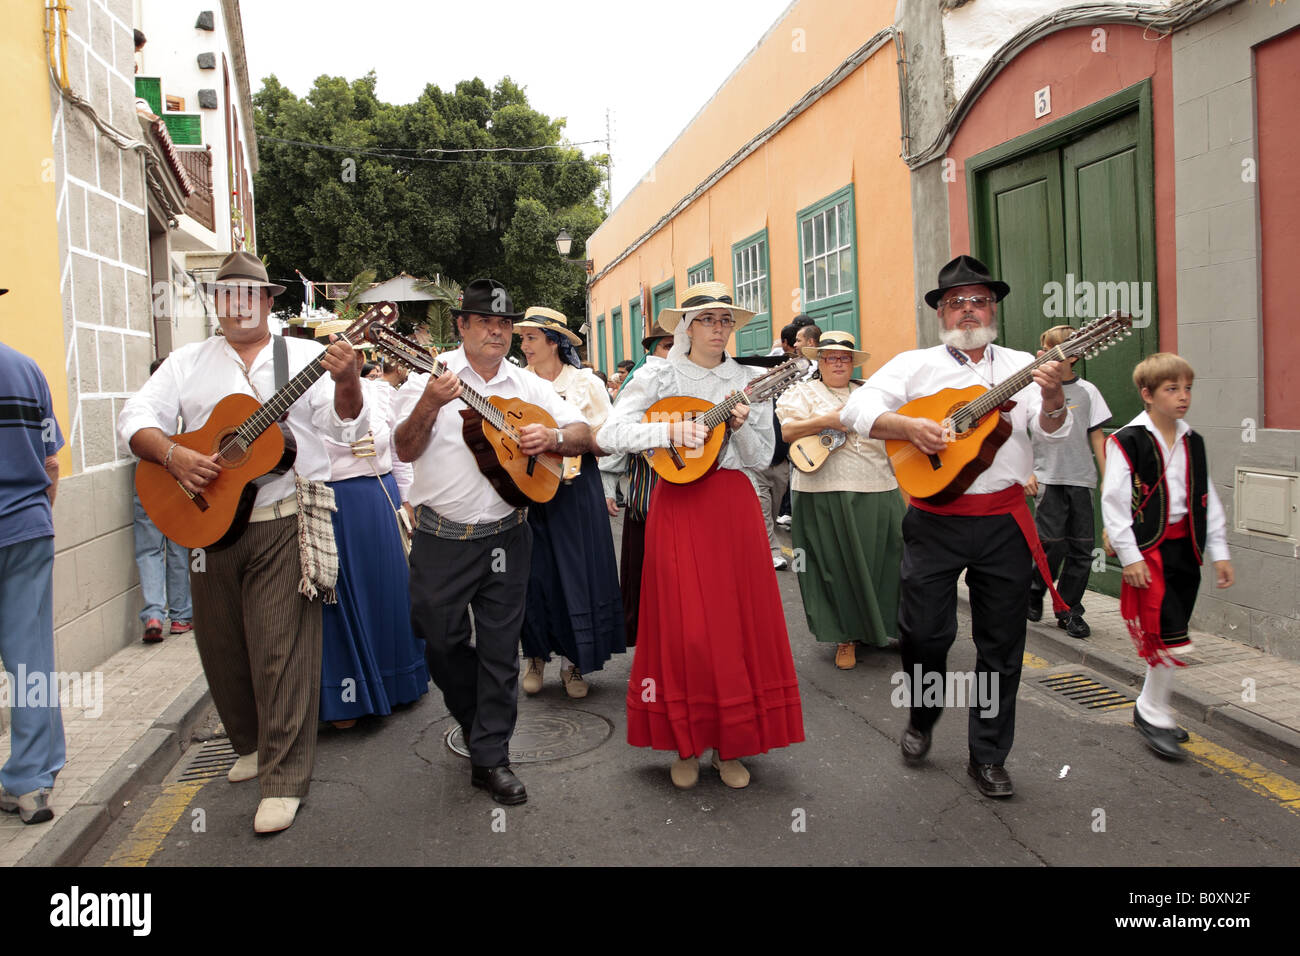 Folkloric group walking and playing various stringed instruments as part of the Romeria de San Isidro in Guia de Isora, Tenerife Stock Photo